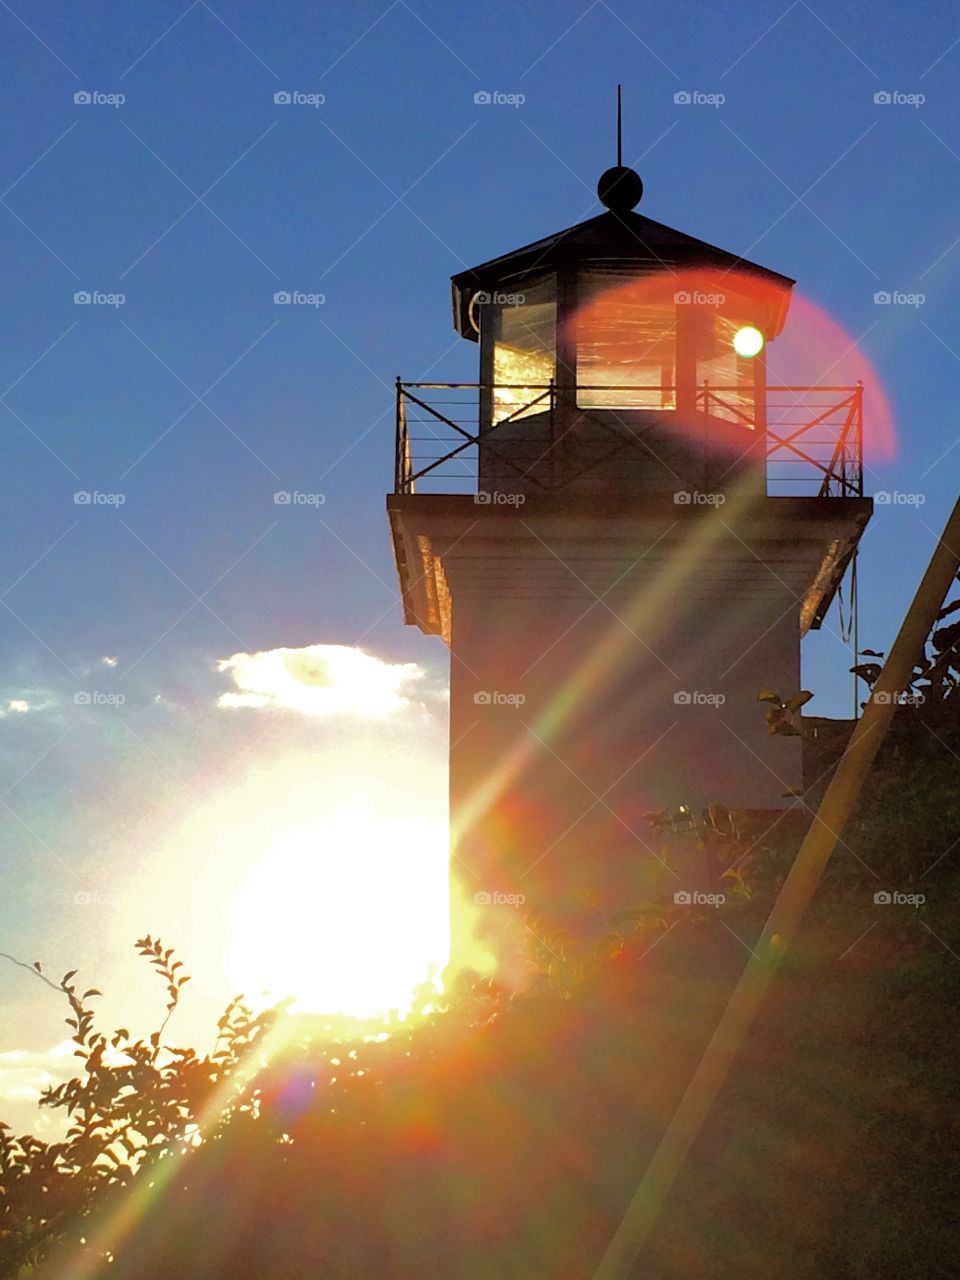 Lighthouse at Sunset. During that time of day when the sun baths everything in gold, the lighthouse glowed.